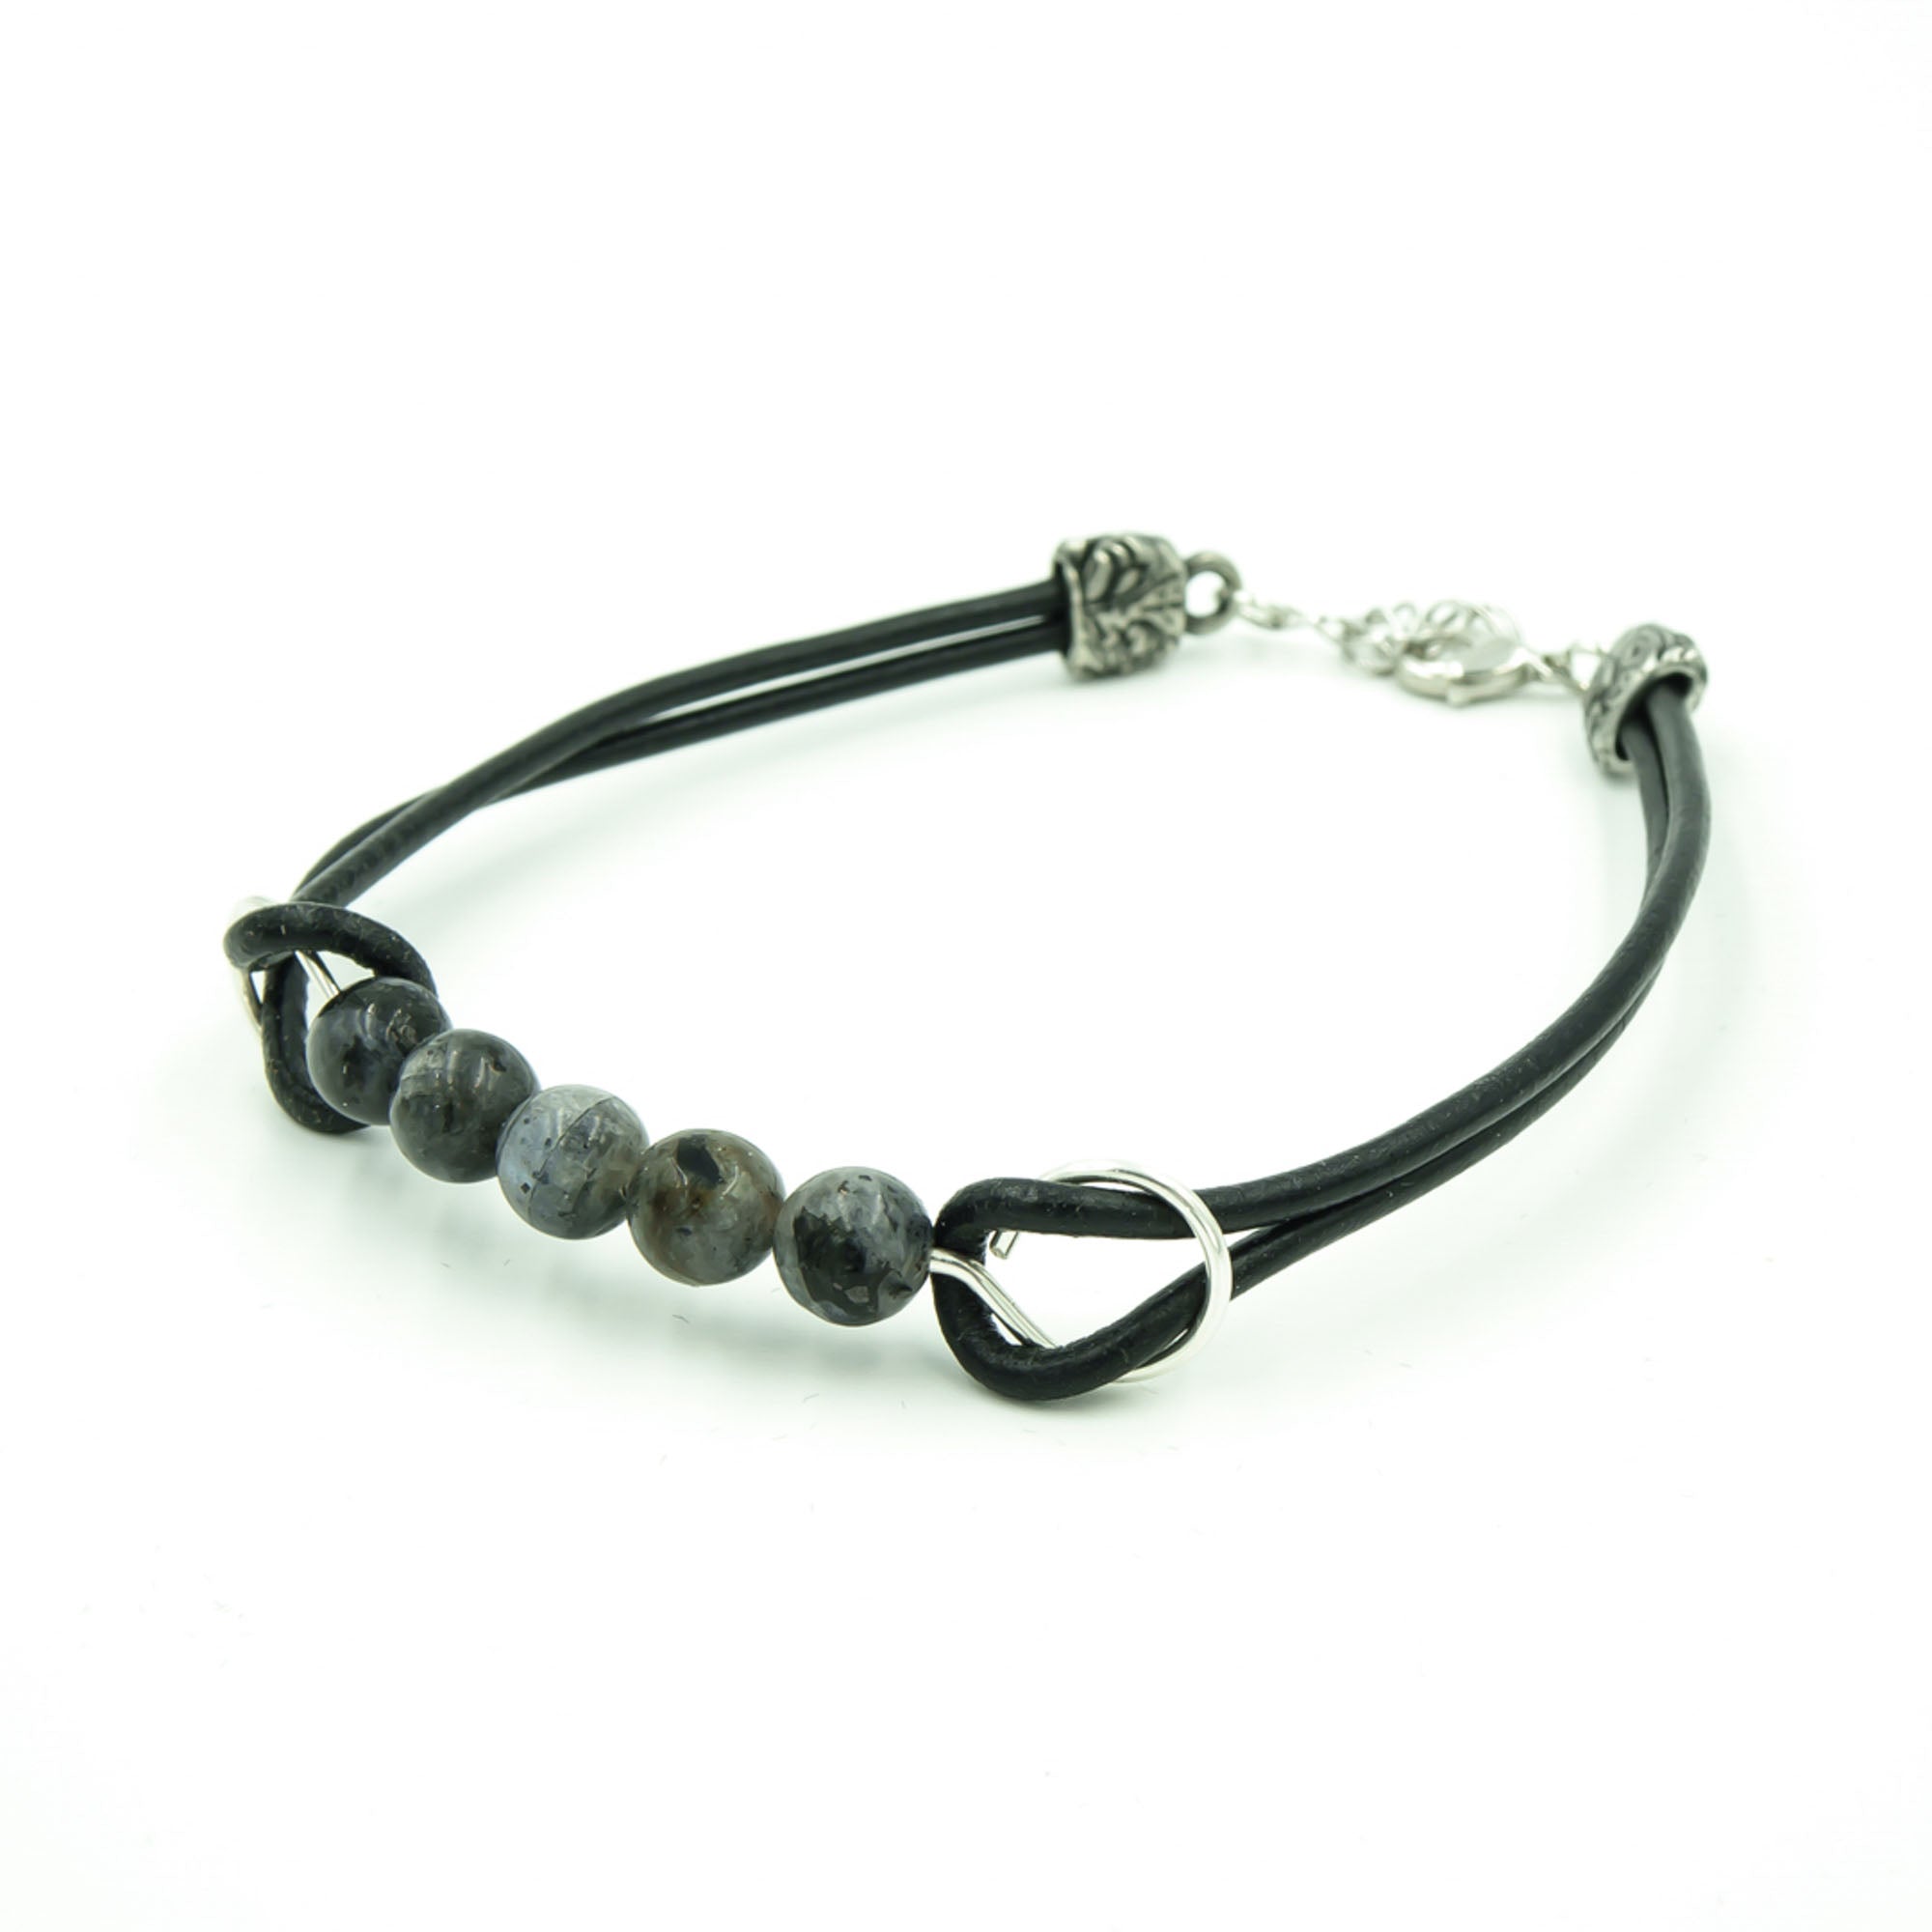 Earth Song Jewelry Handmade Men's Bracelets Collection of Eco-Friendly Jewelry